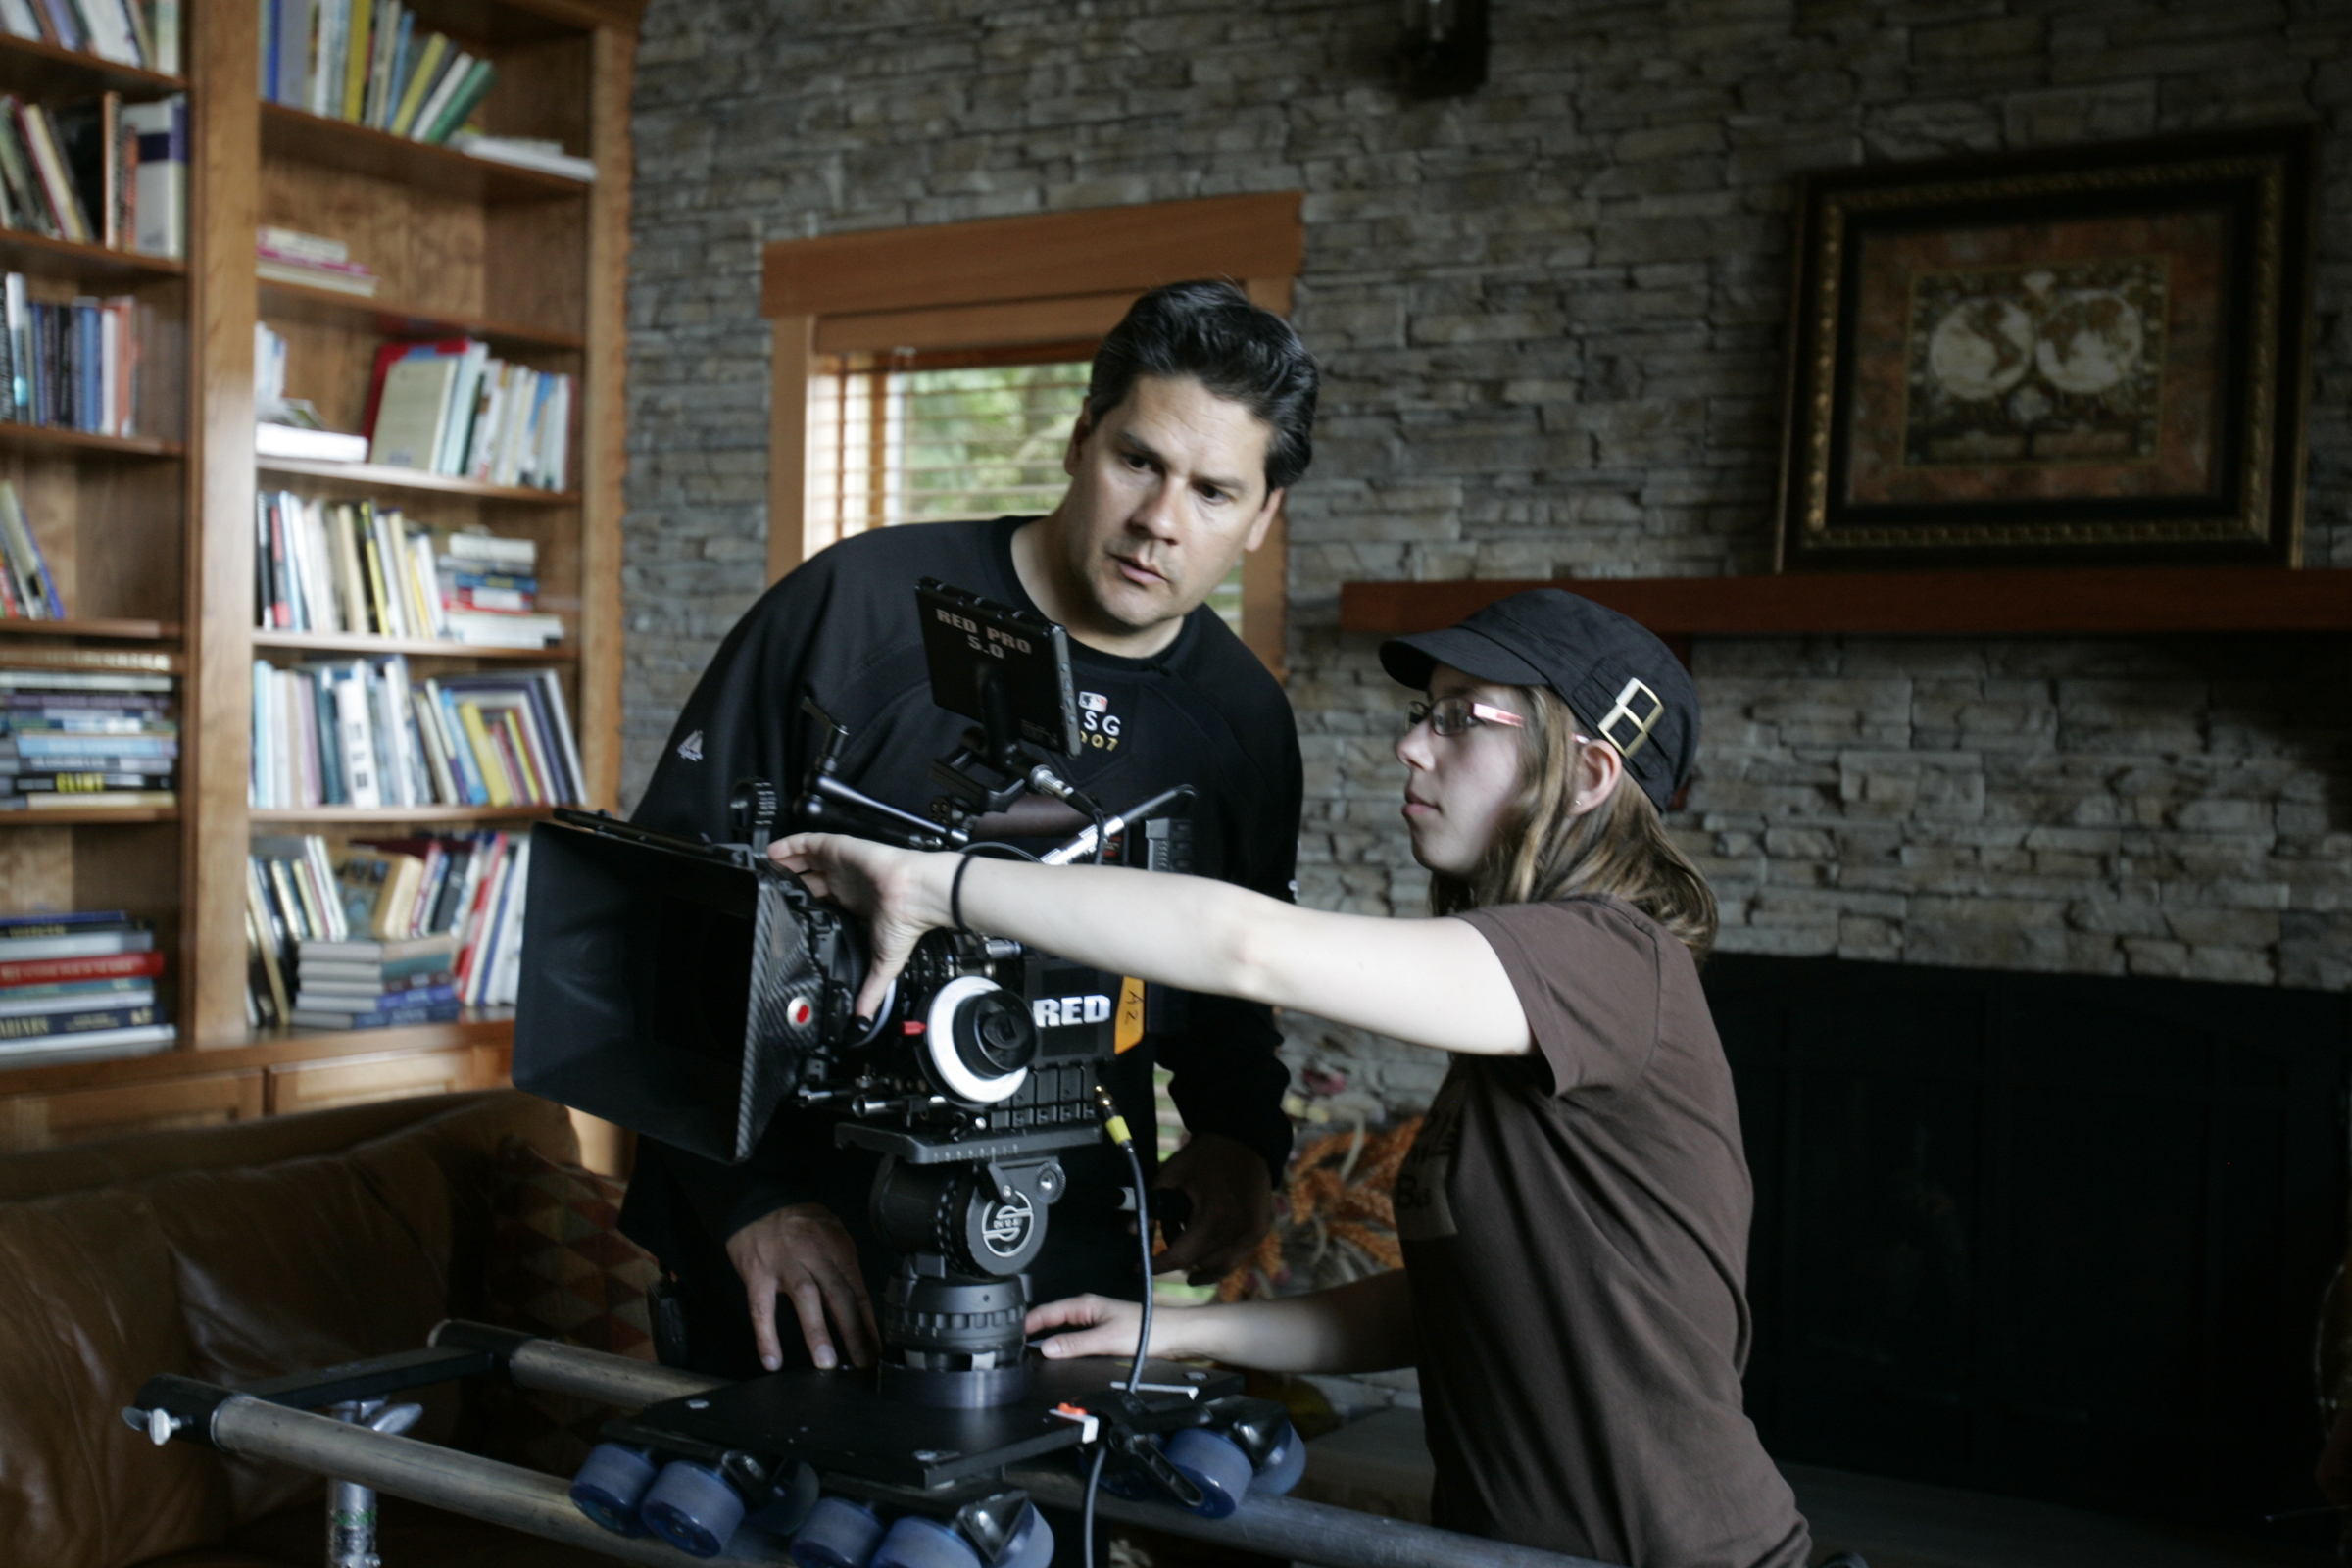 Director Scott A. Capestany with 1st AC on the set of 